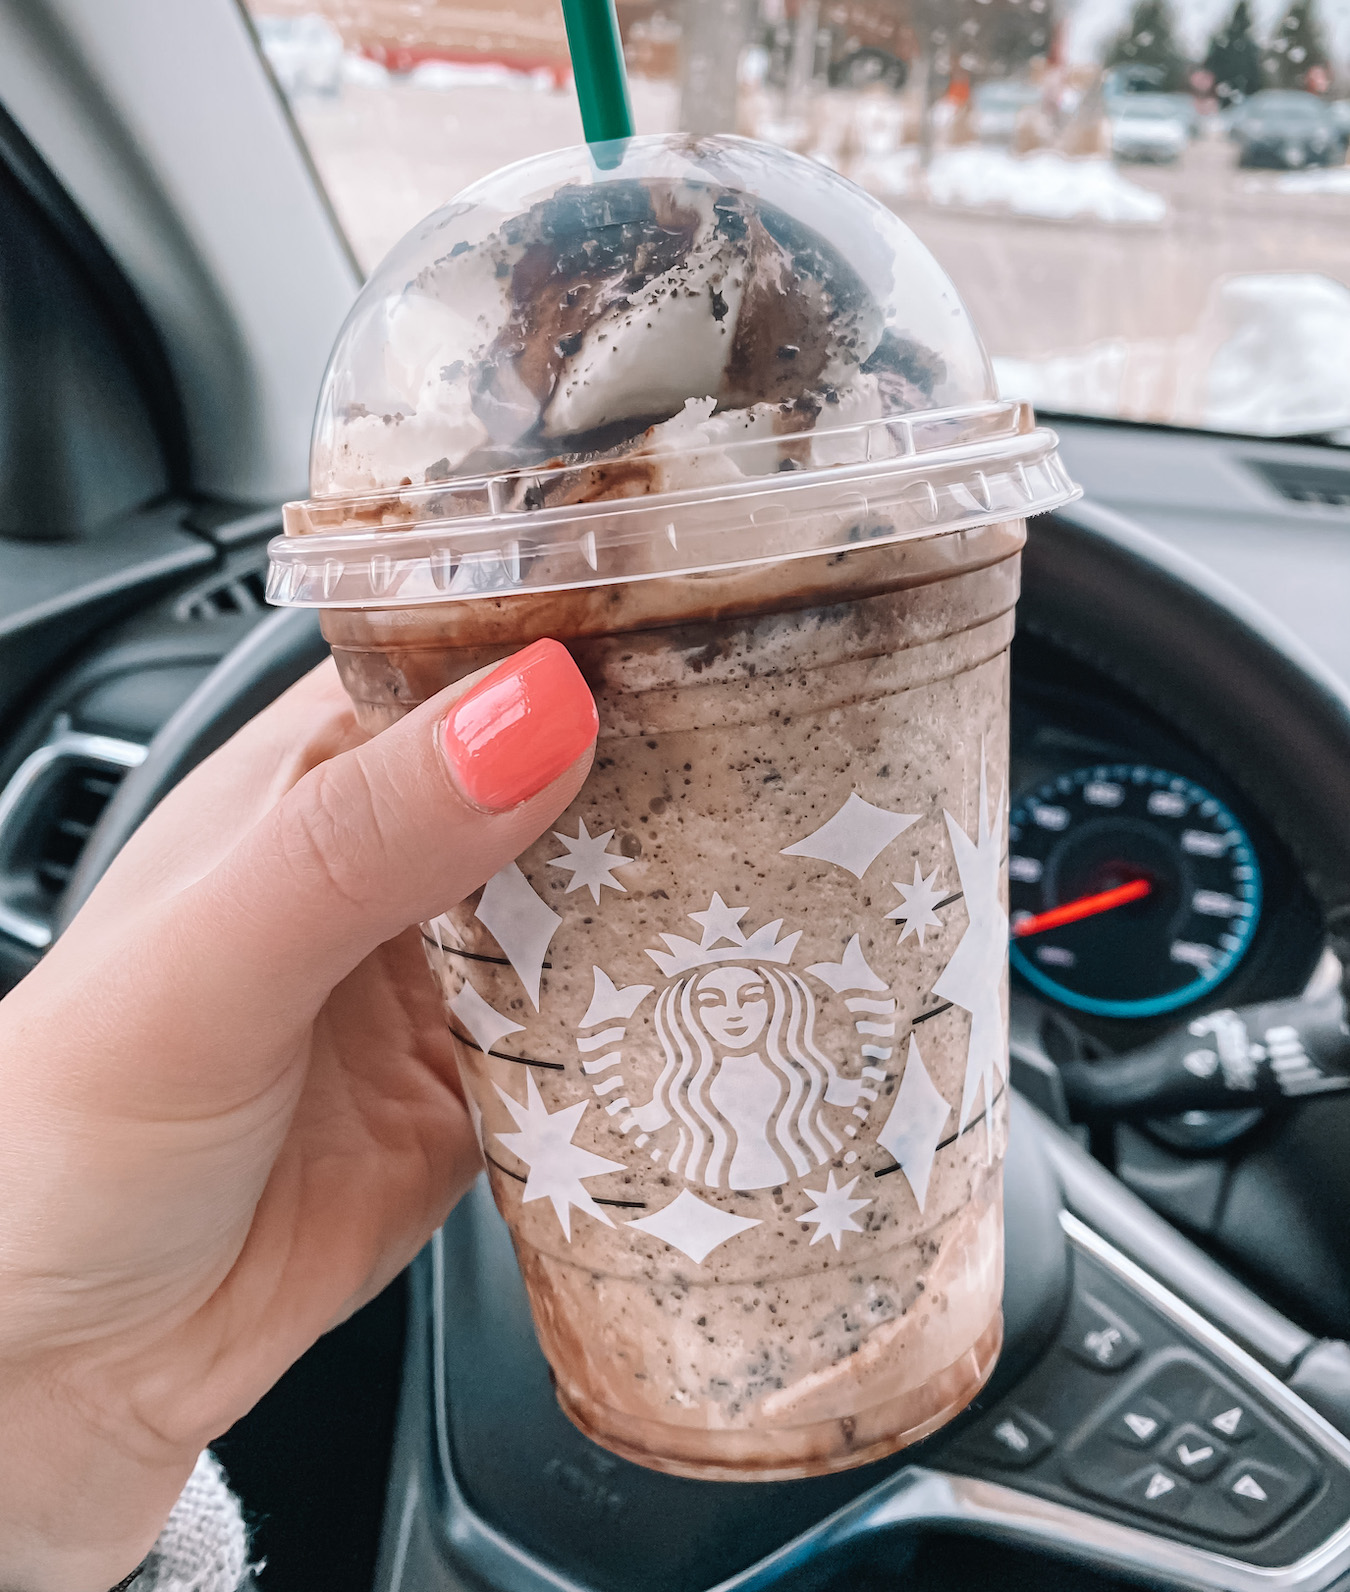 Starbucks Cookies and Cream Frappuccino